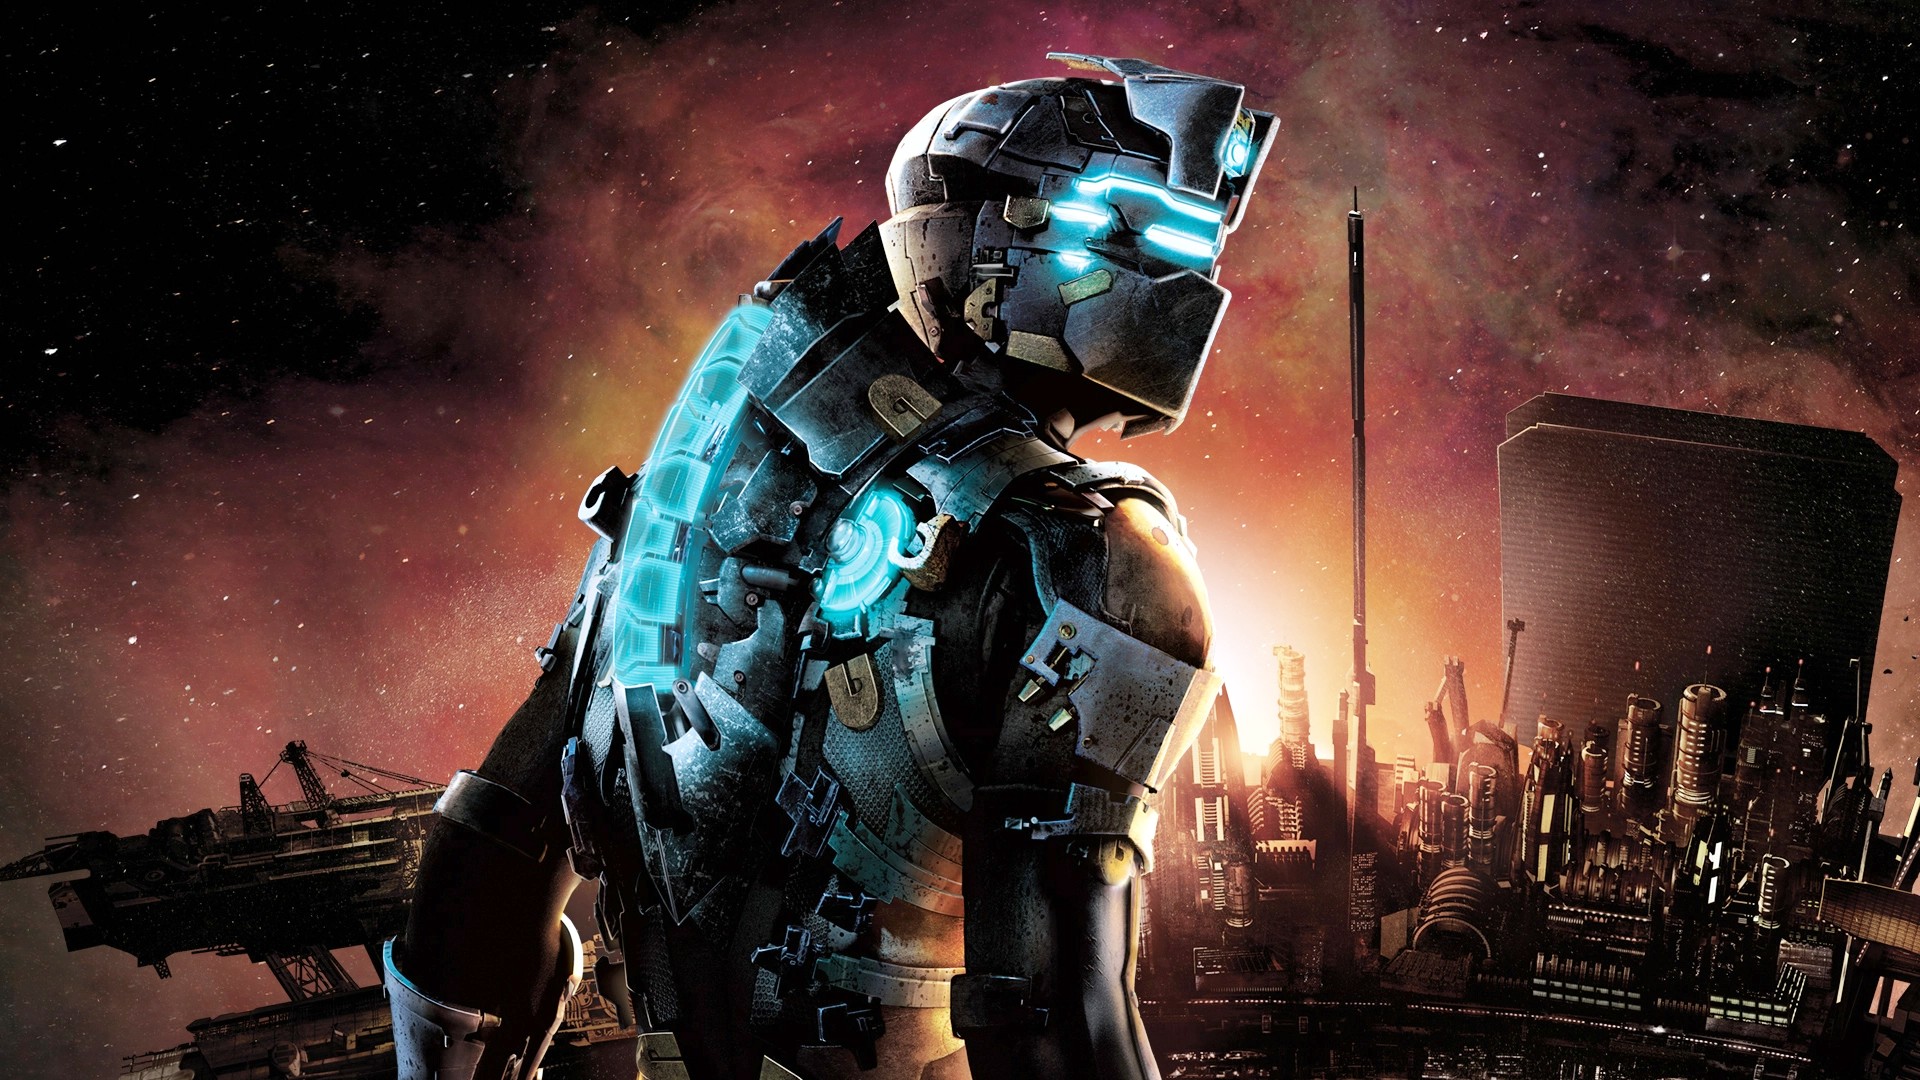 Dead Space remake Steam pre-orders come with a free copy of Dead Space 2